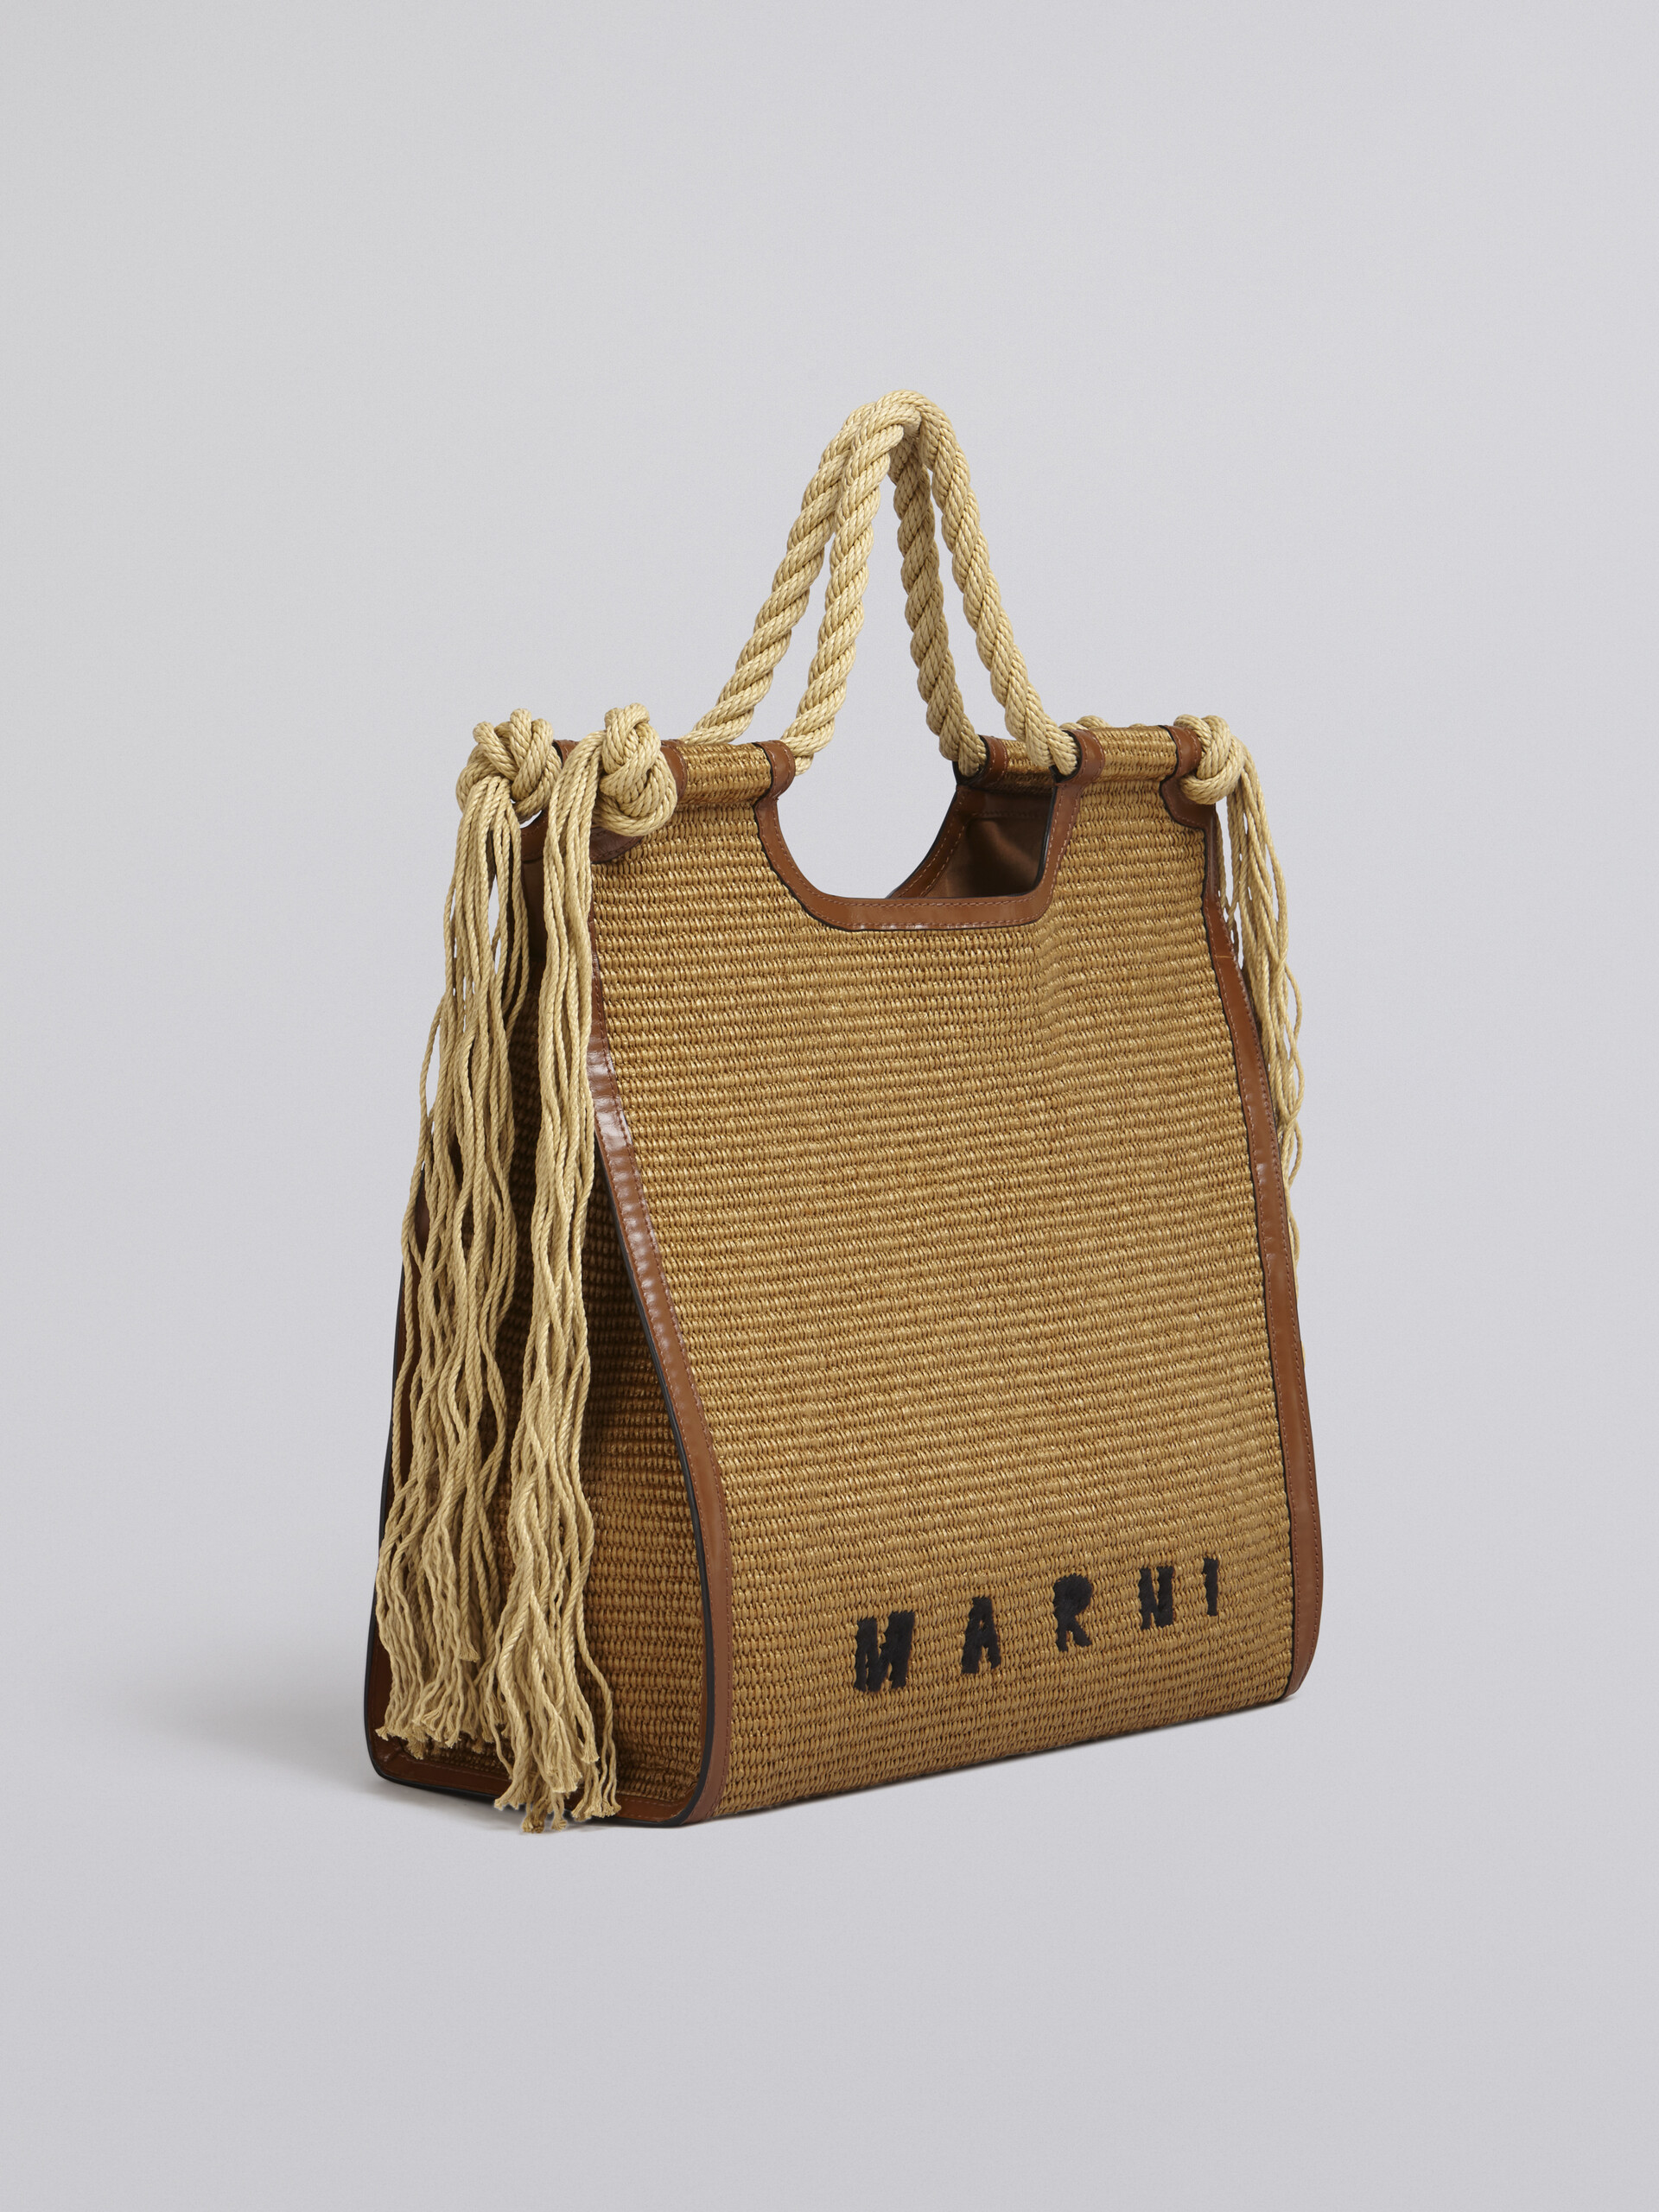 Marcel summer bag in brown leather and raffia with rope handles - Handbag - Image 6